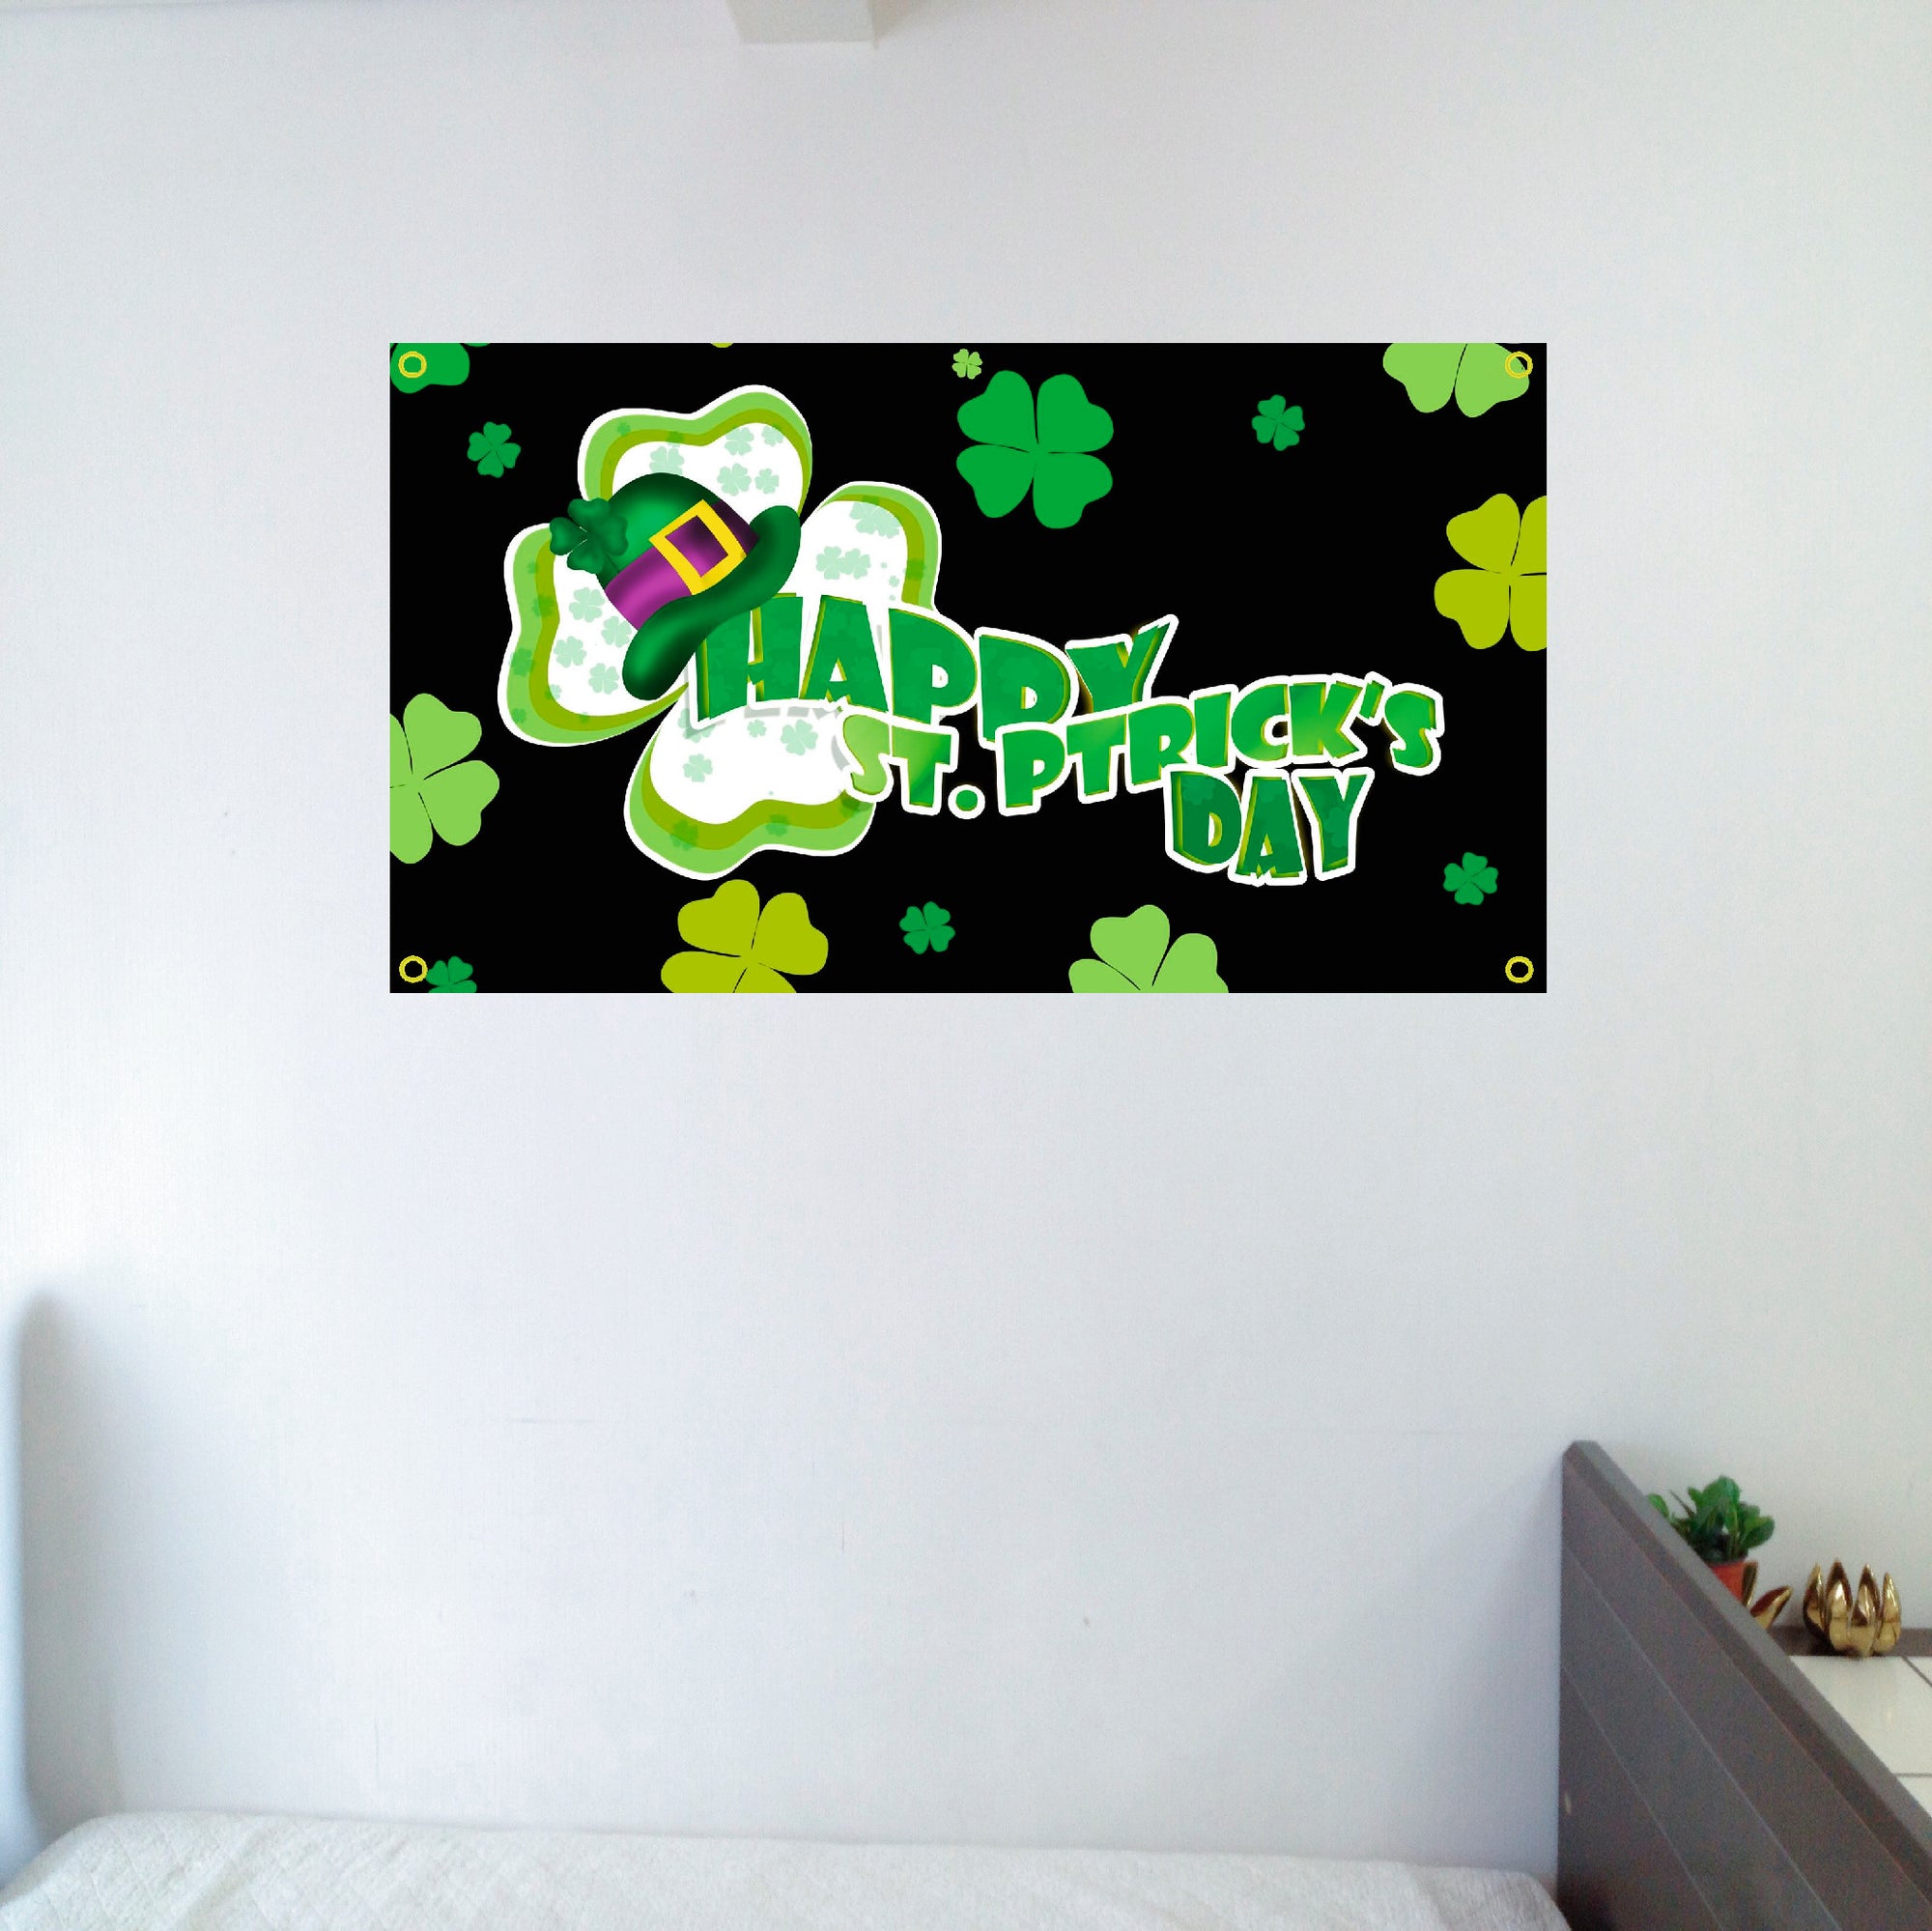 Happy St. Patrick's Day with four leaf clovers banner